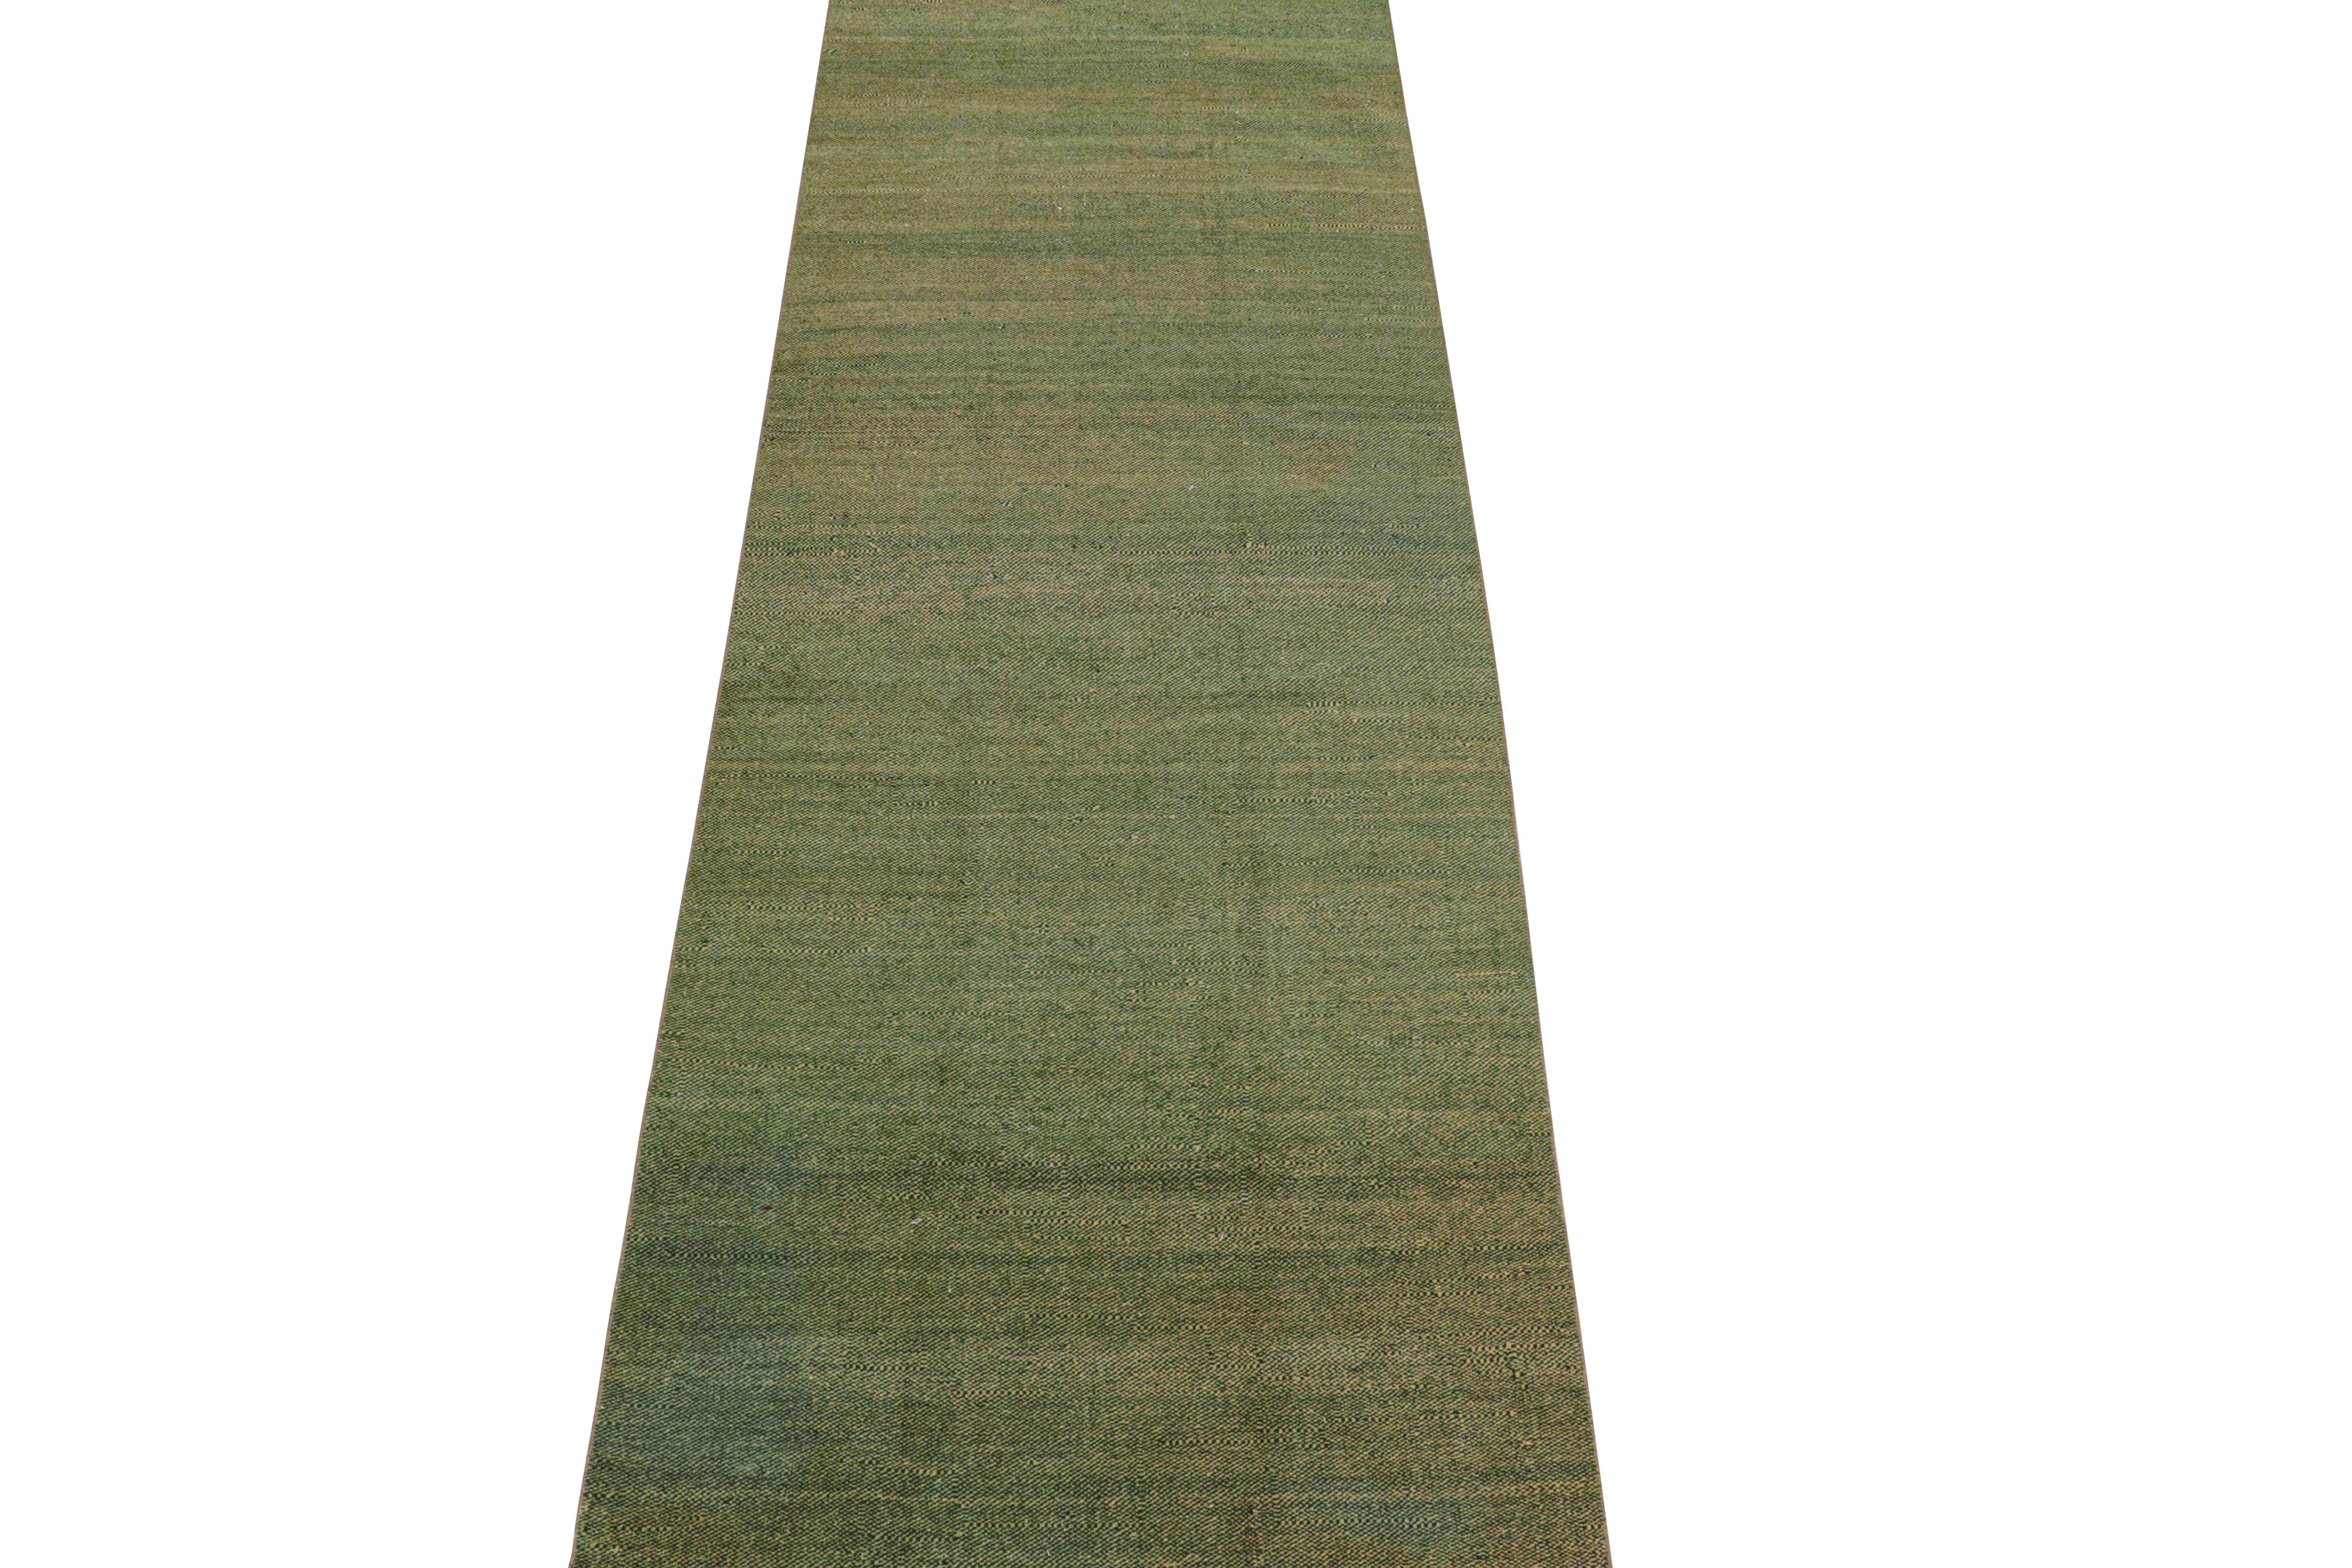 This vintage 4x13 rug is a rare midcentury curation in Rug & Kilim’s Antique & Vintage Collection. hand knotted wool, it originates from Turkey circa 1950-1960 as a most unusual piece in its provenance. 

On the Design: 

This runner was most